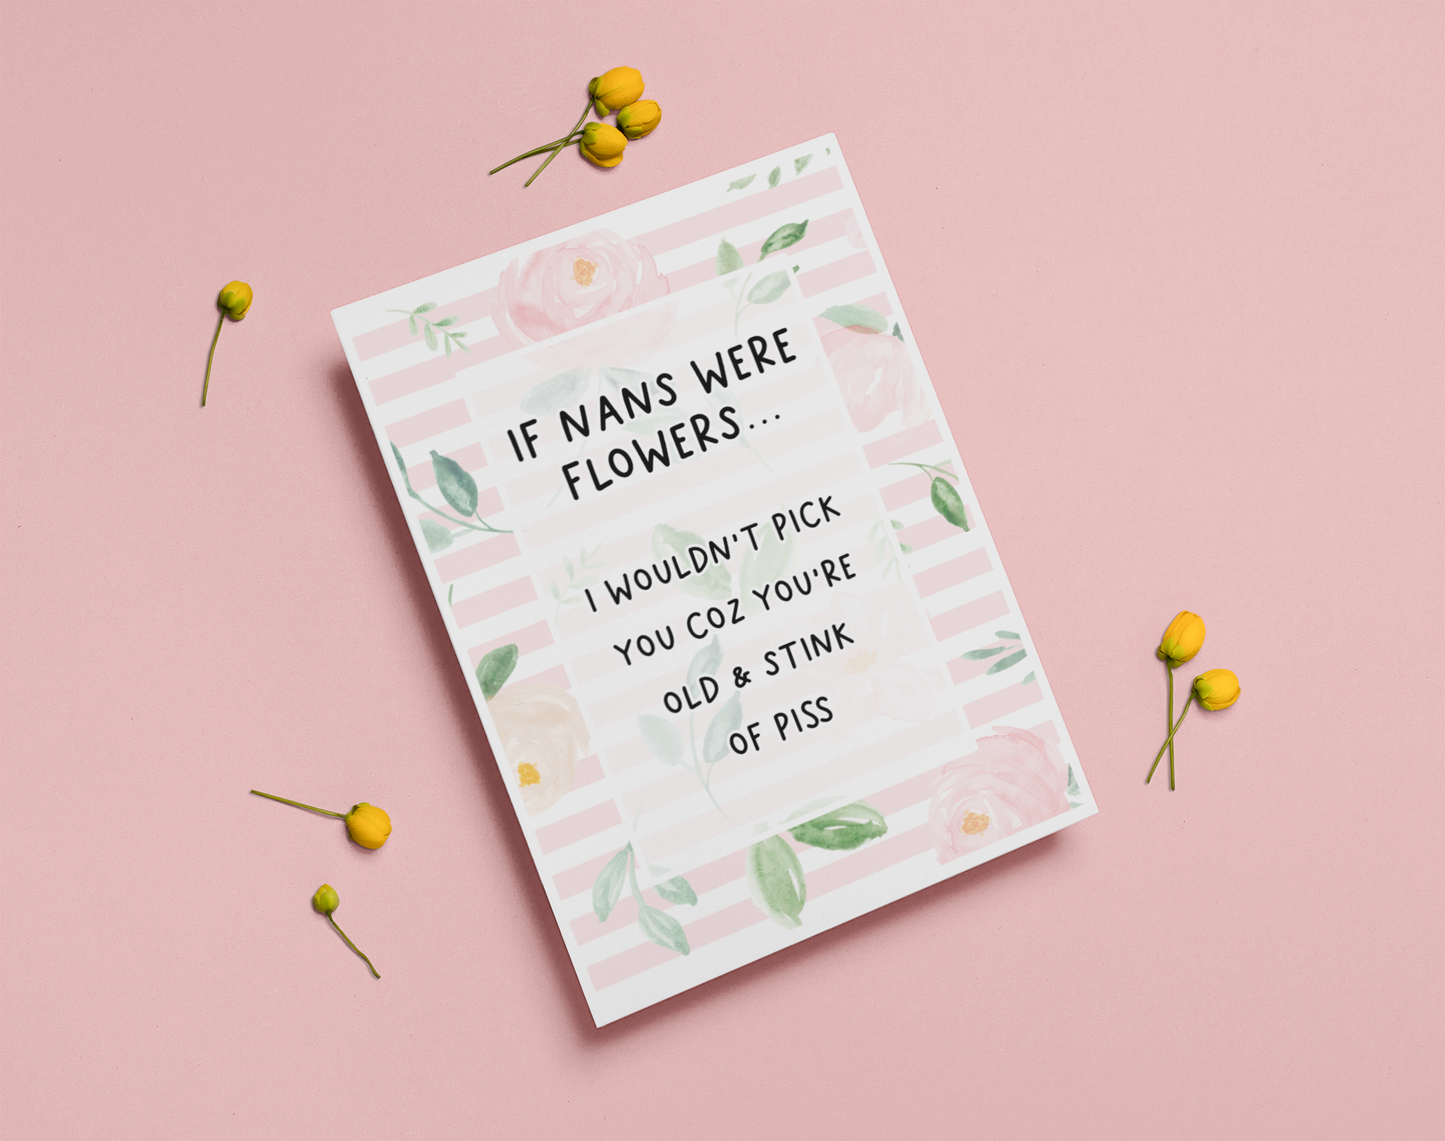 Greetings card with a pastel colour floral design to the front with the quote 'if nans were flowers... i wouldn't pick you coz you're old & stink of piss' printed in the middle in black ink.